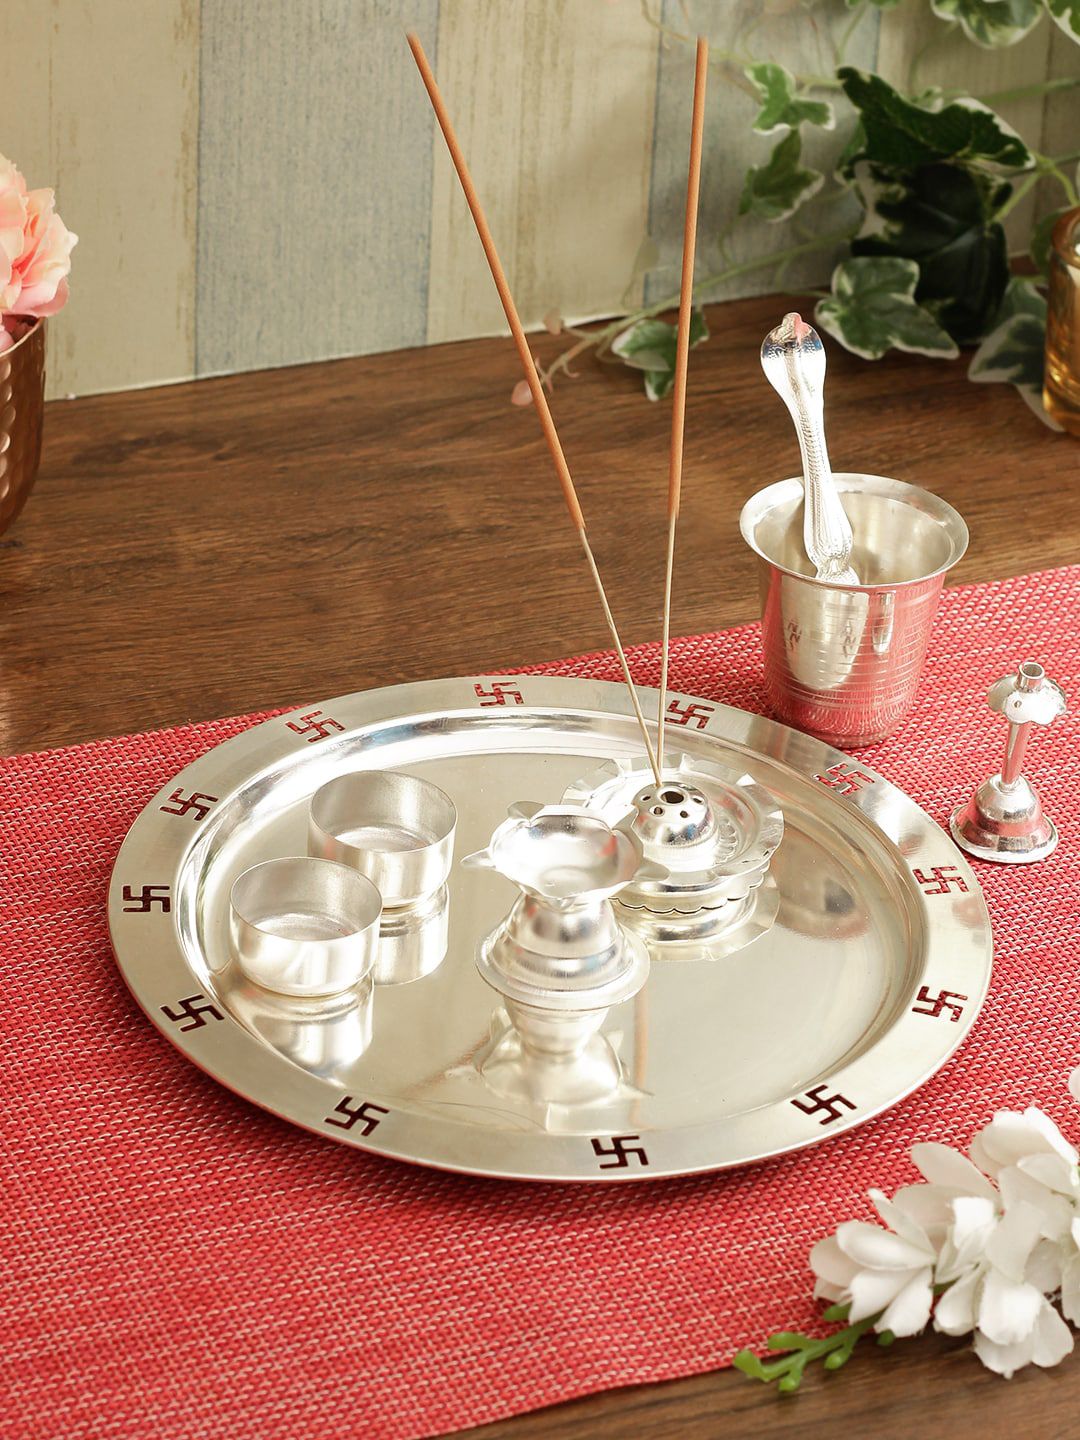 Aapno Rajasthan 8 Pcs Silver-Plated Stainless Steel Pooja Thali Set Price in India